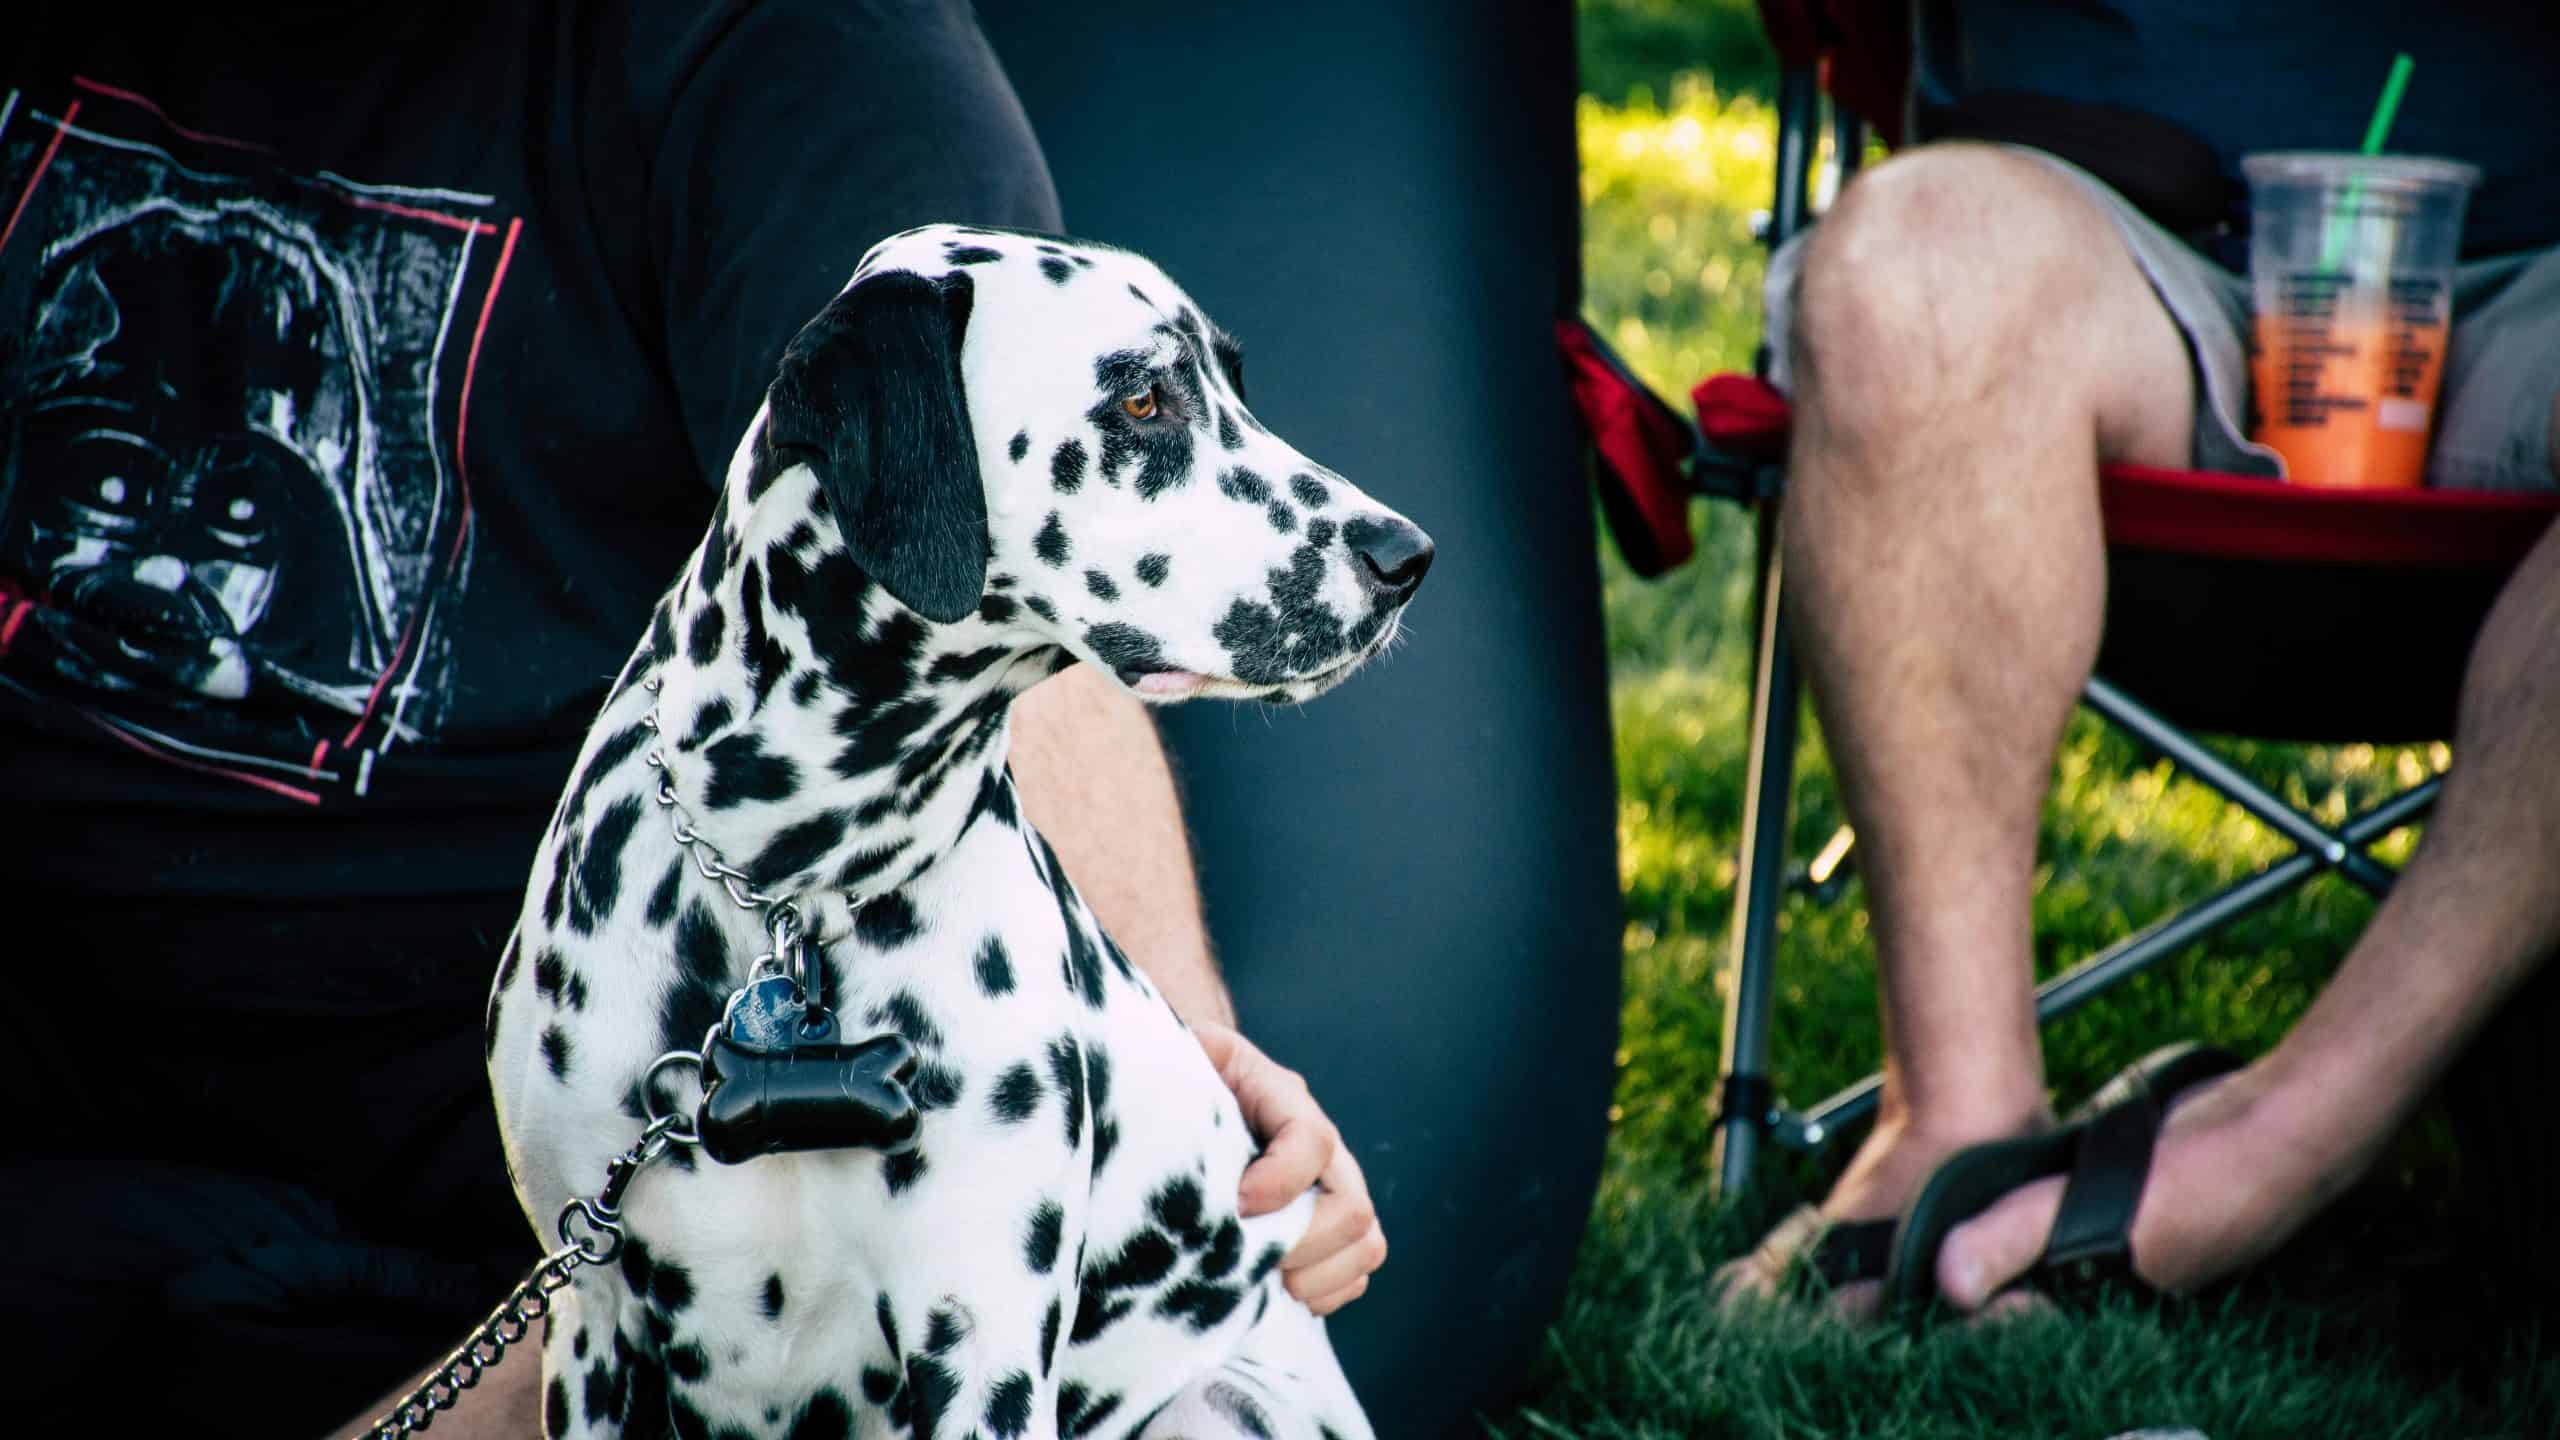 A Dalmatian sits next to its owners on the grass